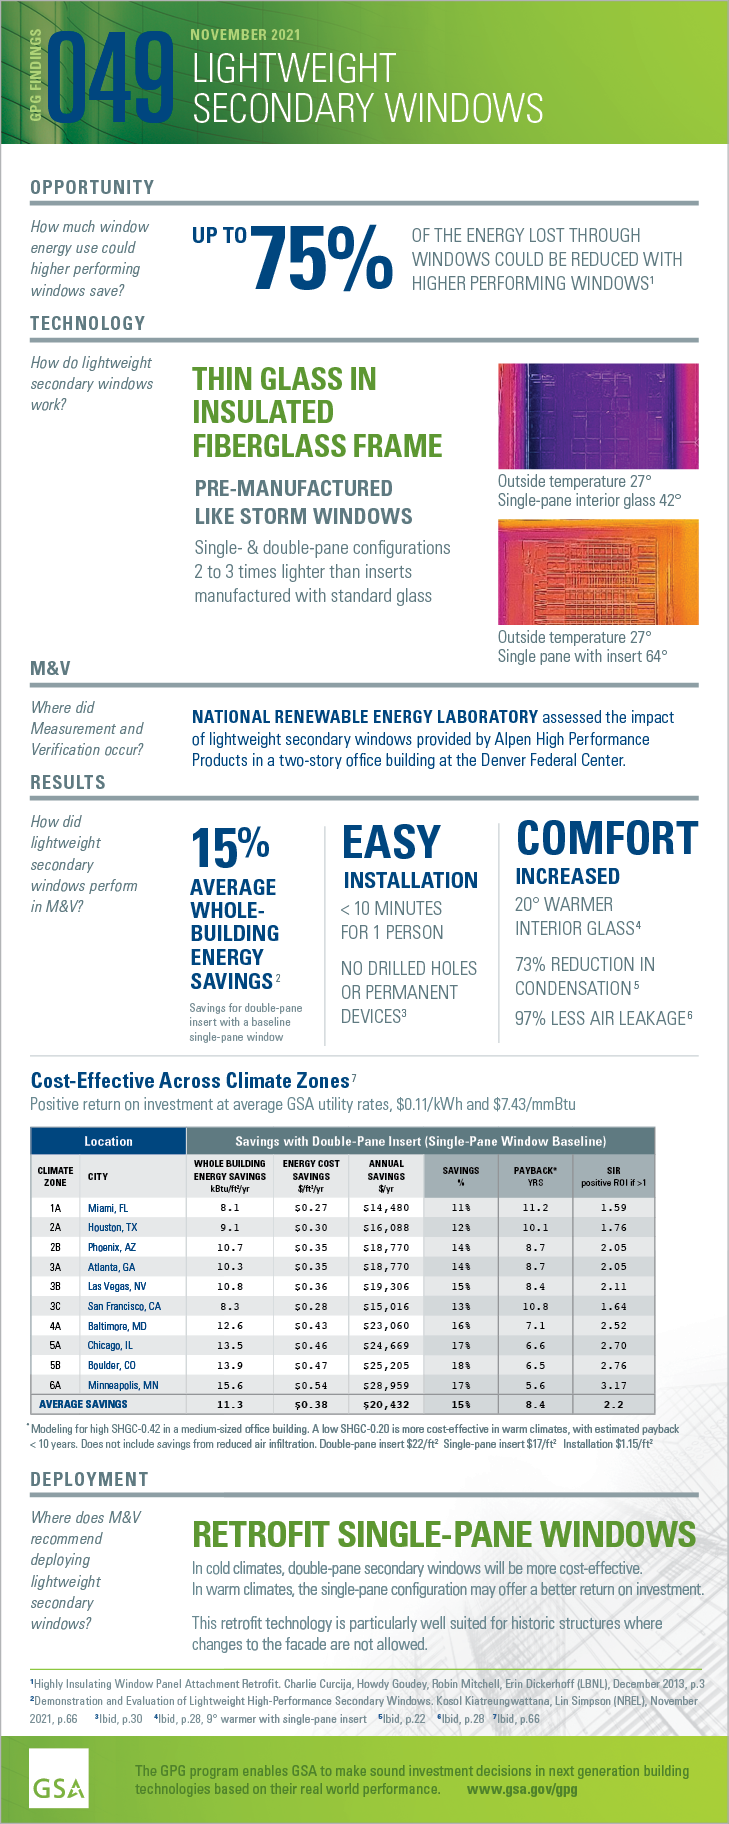 Download the PDF of the full-size infographic for GPG049 Lightweight Secondary Windows.